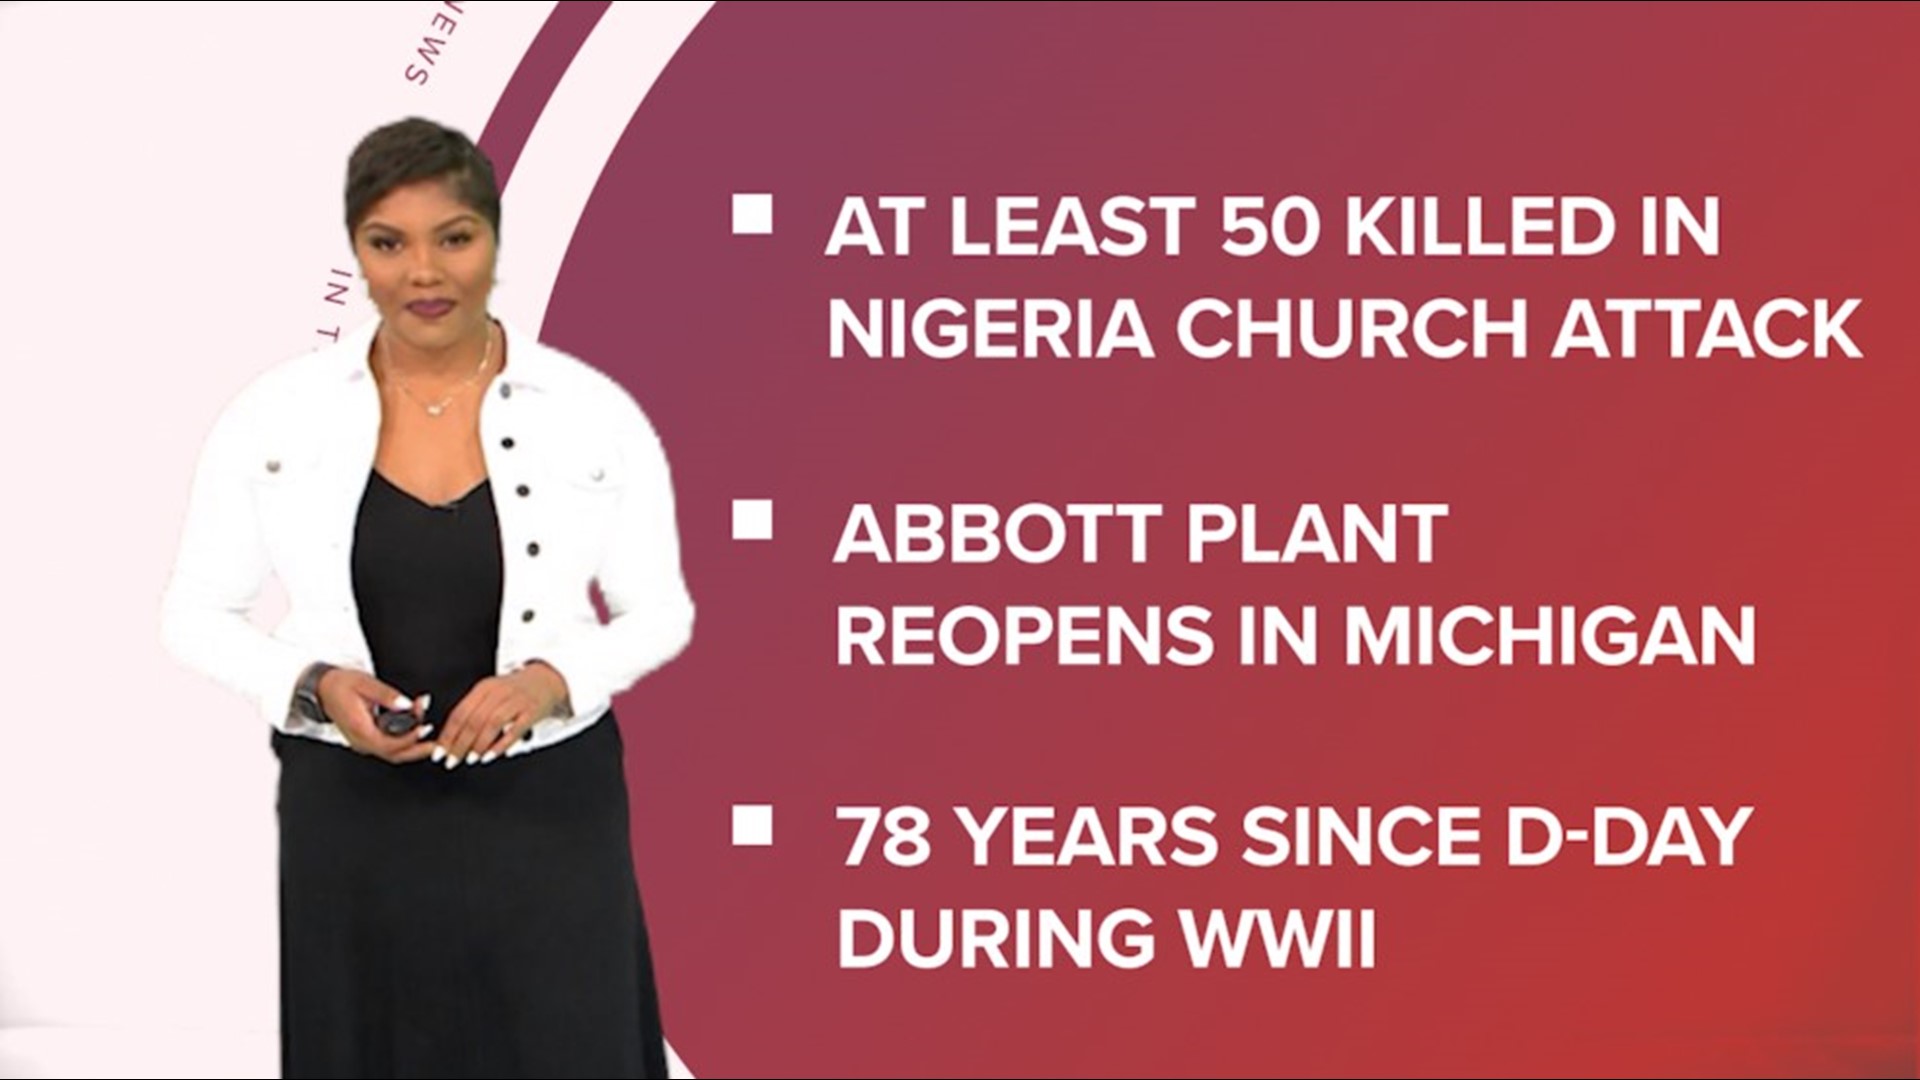 A look at what is happening across the world, from a deadly church attack in Nigeria, to an Abbott plant reopen for formula and marking 78 years since D-Day.